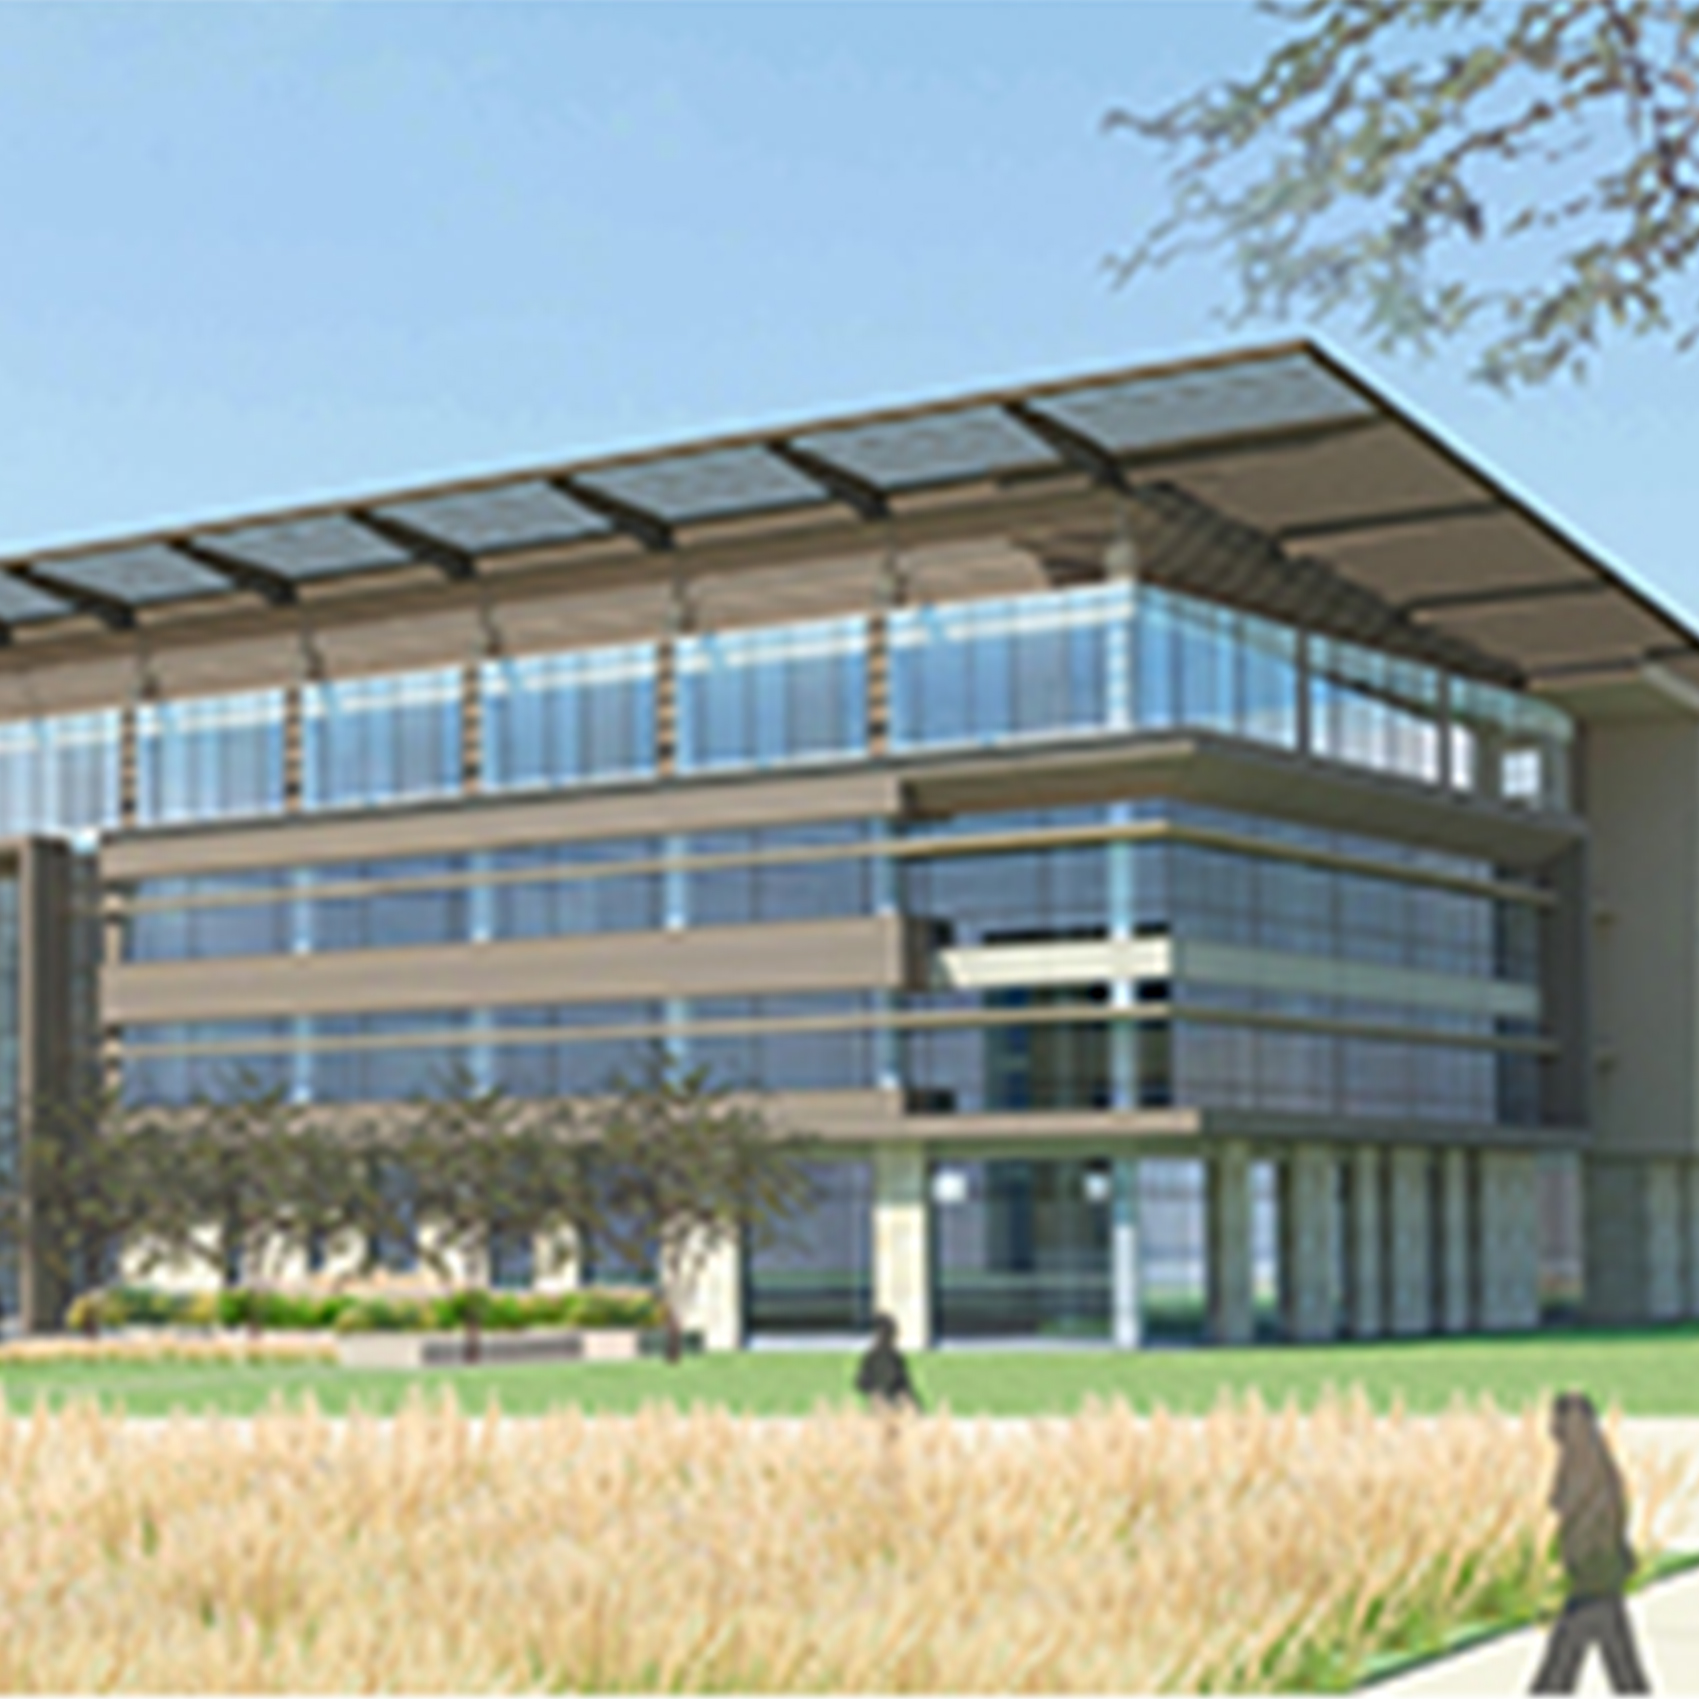 Rendering of the Engineering Education Complex